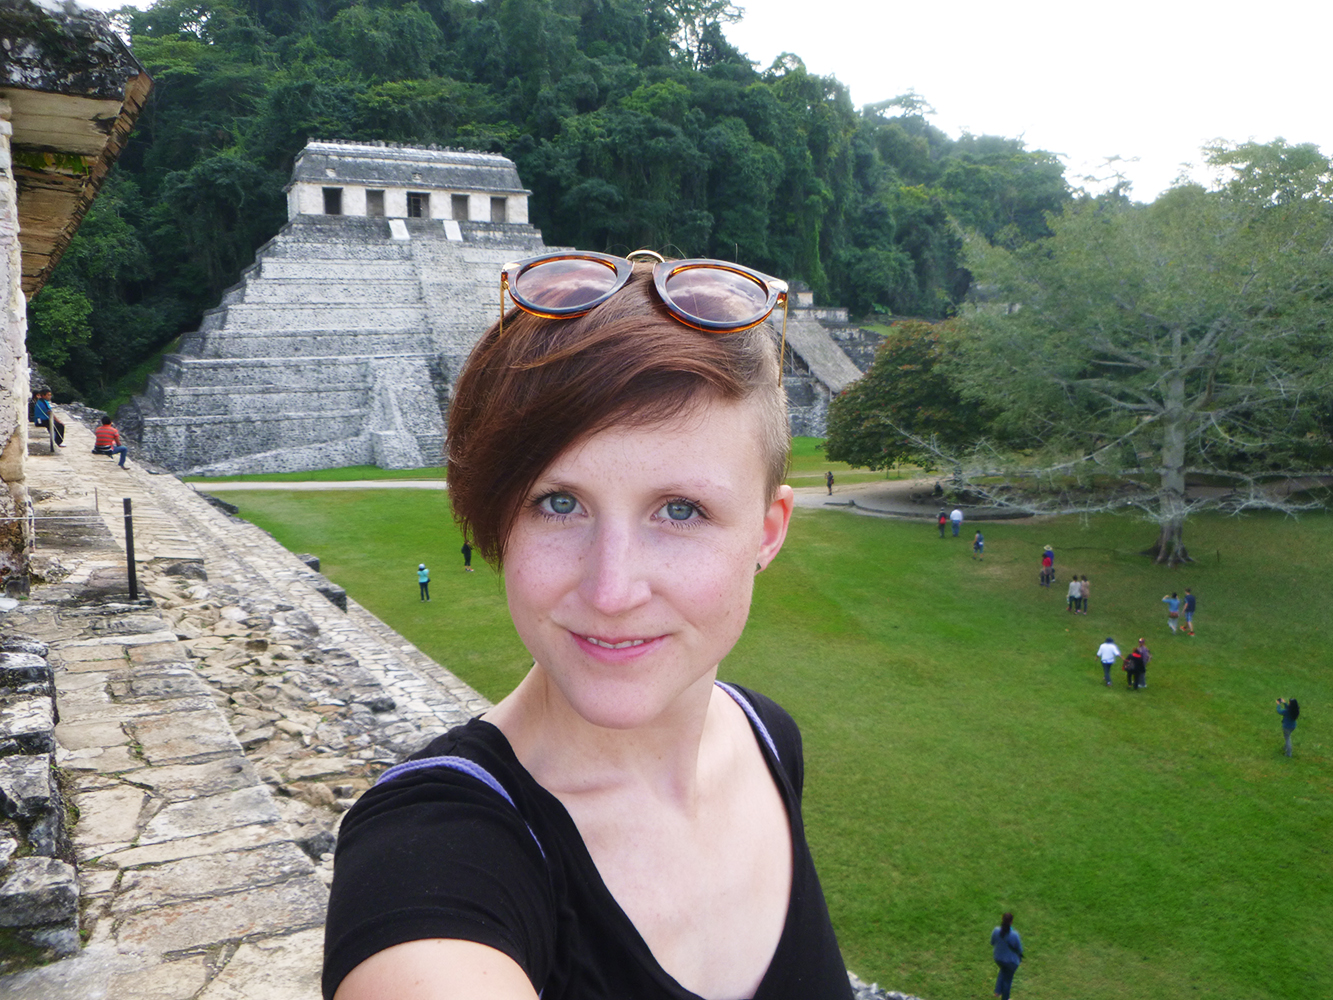 backpacking palenque mira